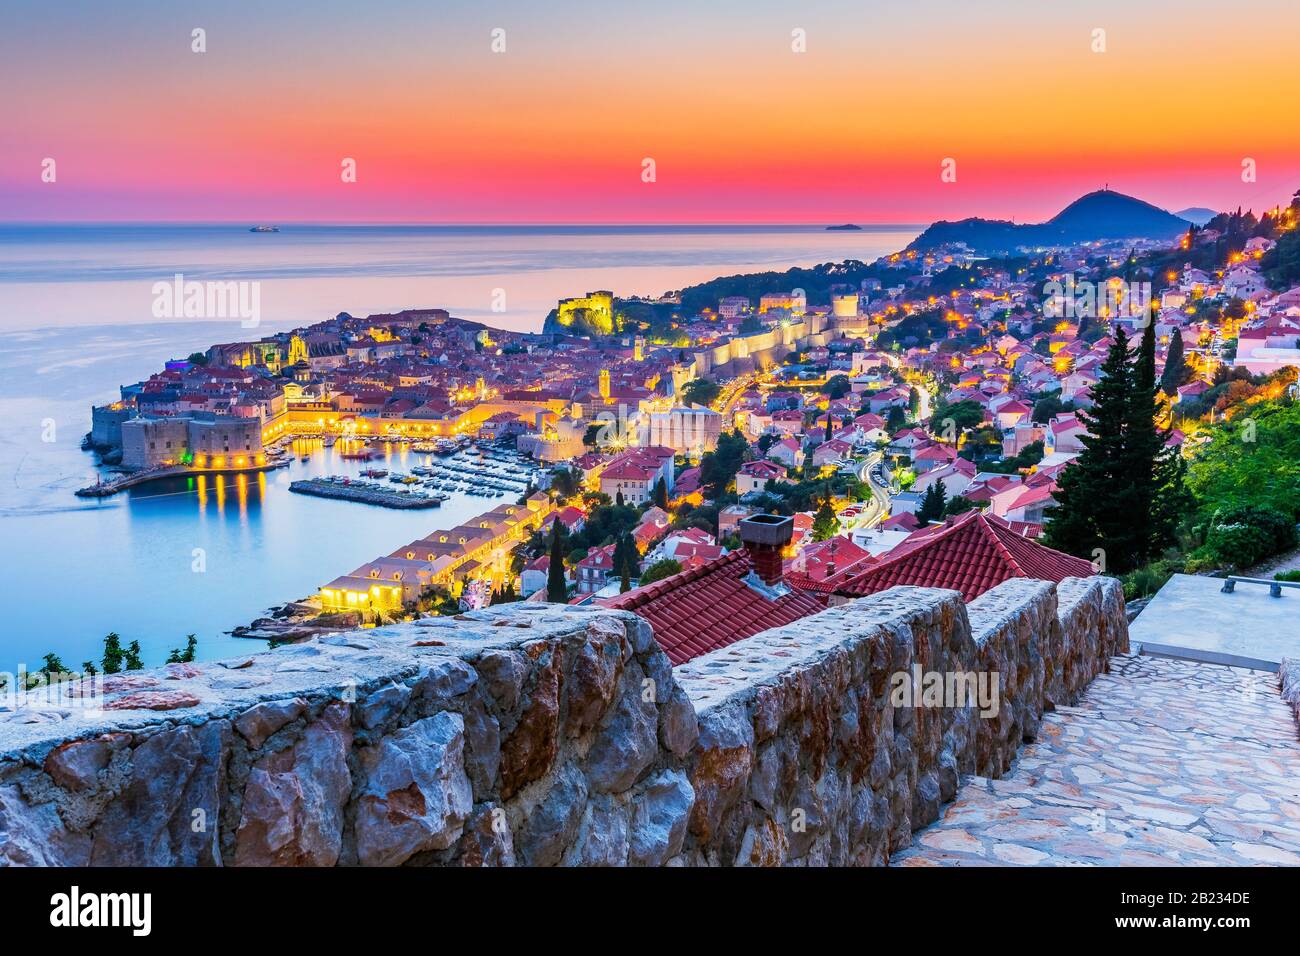 Dubrovnik, Croatia. A panoramic view of the walled city at sunset. Stock Photo